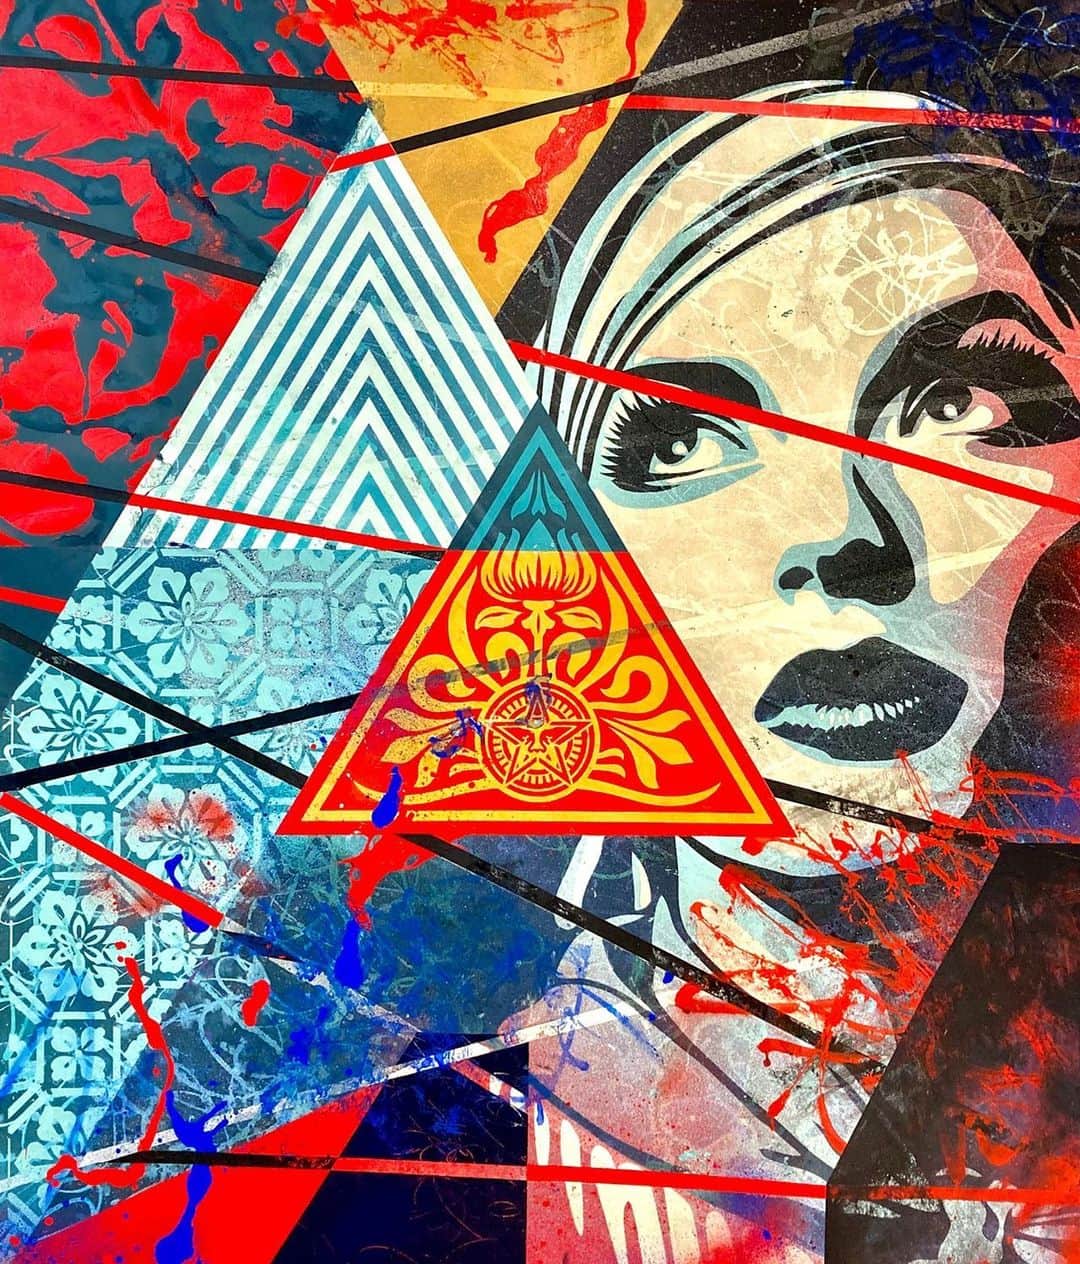 Shepard Faireyのインスタグラム：「My gallery @subliminalprojects is pleased to present The Versus Project IV, an international traveling group exhibition co-curated by the German artist duo Layer Cake (@layercake_hundertmarkhartl), individually known as graffiti veterans Patrick Hartl (@stylefighting) and Christian Hundertmark (@c100atelier). The show challenges the well-known Graffiti rule: never paint over other writers, by inviting the broader graffiti and street art community to do just that. The collaborative works result in layers of each artist's contribution that both blend and highlight their personal styles.⁠ ⁠ This show concept is very appealing to me not only because I love Layer Cake’s art and collaborating with other artists, but also because Layer Cake’s approach harnesses the charm of what organically and chaotically happens to art on the streets as weather and other forces degrade/evolve the original creation.⁠ ⁠ Join us Saturday, September 16th, 6-10 PM for the Opening Reception. To kick off the reception the gallery will host a special Artist Talk at 6:15 PM with Layer Cake, featuring @chaz_bojorquez and myself, moderated by Steven P. Harrington co-founder of Brooklyn Street Art (@bkstreetart). RSVP to rsvp@subliminalprojects.com to attend. Link in bio for more information!⁠ –Shepard⁠ ⁠ CONTRIBUTING ARTISTS⁠ ⁠ AKTE ONE (@akte_one), Bond Truluv (@bondtruluv), Carolina Falkholt (@carolinafalkholt), Chaz Bojórquez (@chaz_bojorquez), Cren (Michel Cren Pietsch)(@cren_art), CRYPTIK (@_cryptik_), Dave the Chimp (@davethechimp), Flying Förtress (@flyingfortress5410), Formula76 (formula76), HERA, HNRX (@hera_herakut), Layer Cake (@layercake_hundertmarkhartl), MadC (@mad_c1), MAMBO (Flavien Demarigny) (@mambo.vu), Matthias Edlinger (@edlinger_did_it), Łukasz Habiera NAWER (@n_nawer), Peter "Paid" Levine (@peterpaidnyc), Rocco & His Brothers (@rocco_and_his_brothers), Shepard Fairey (@obeygiant), Various and Gould (@variousandgould), and Zepha (Vincent Abadie Hafez) (@zepha1).」